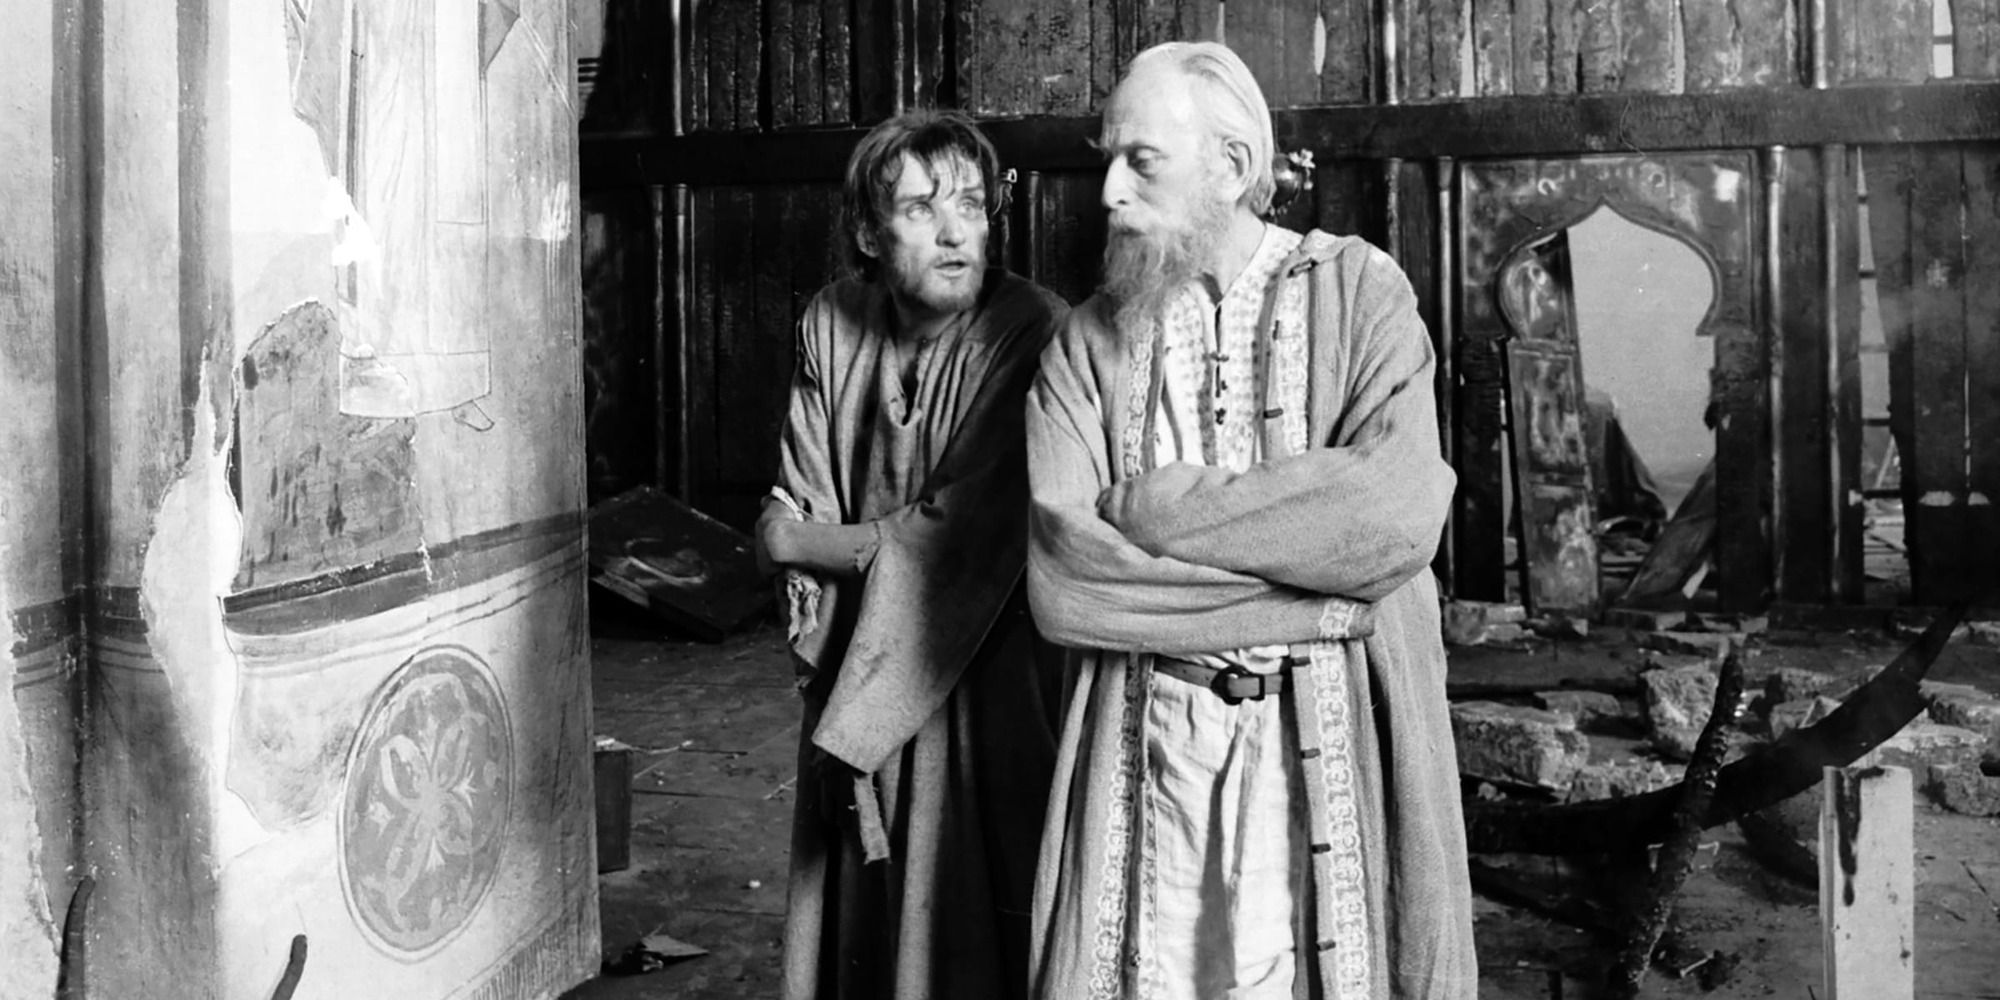 Andrei and a mysterious man from Andrei Rublev